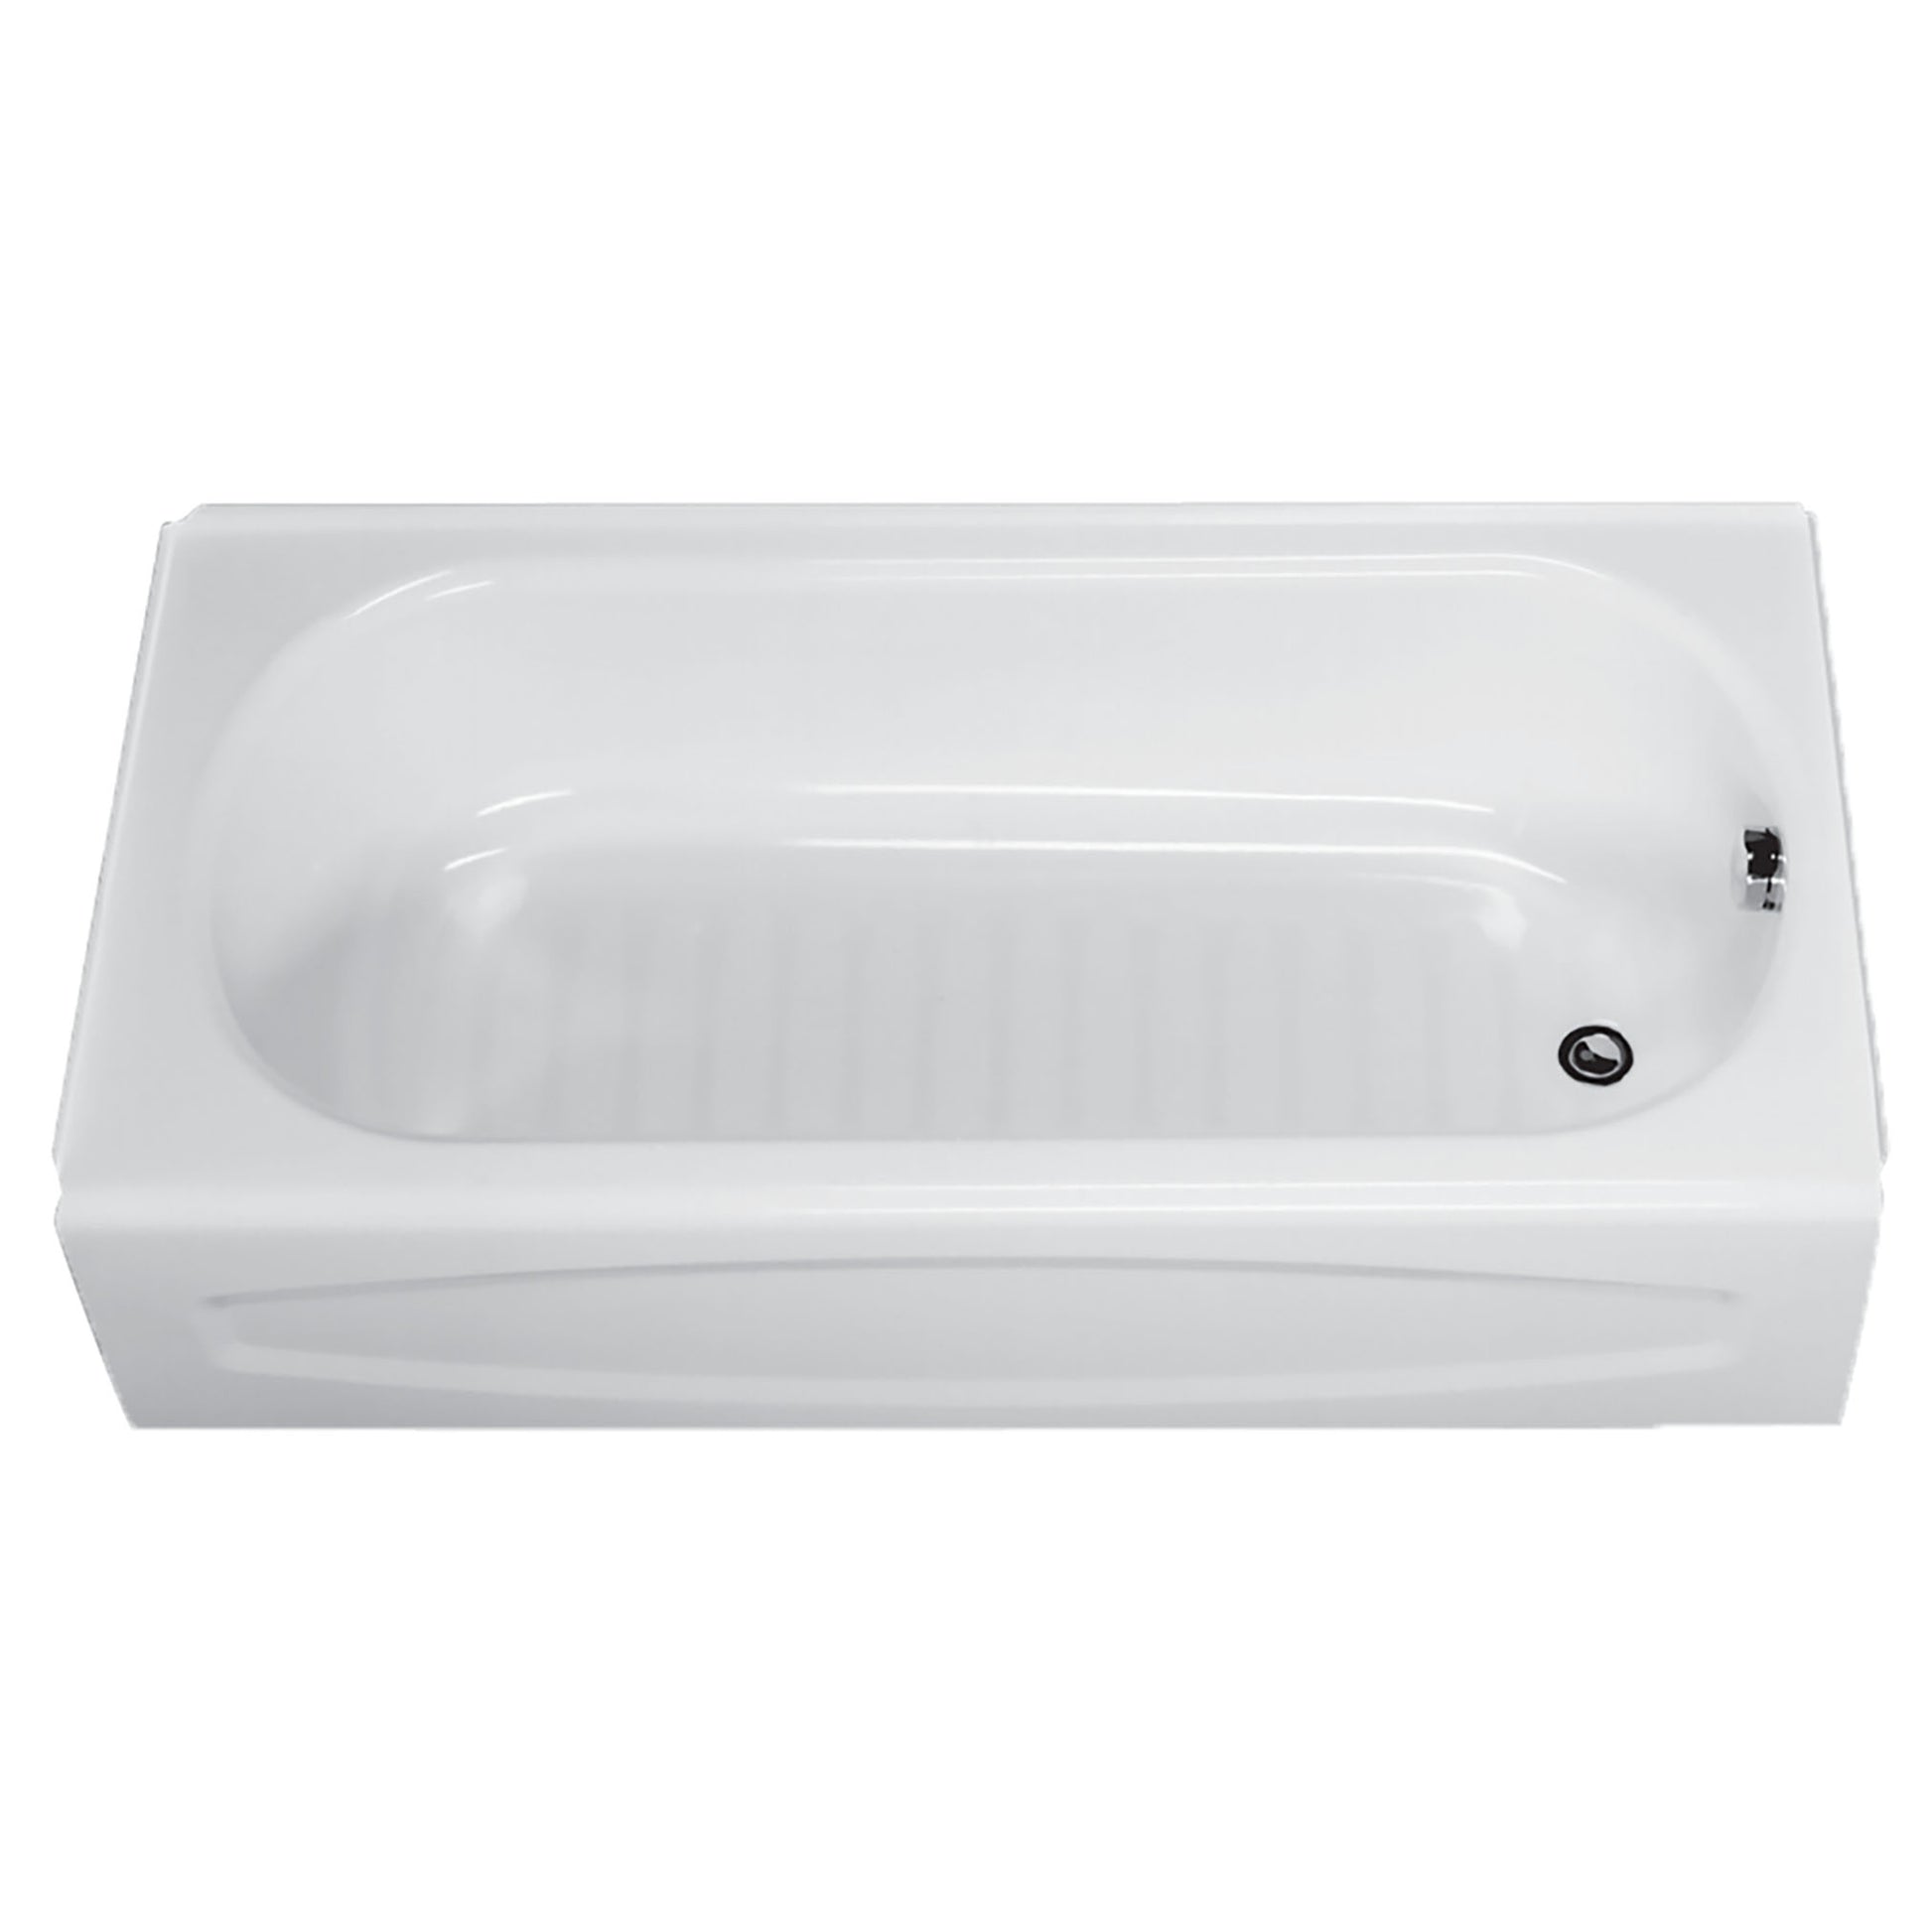 AMERICAN-STANDARD 0255112.020, New Salem 60 x 30-Inch Integral Apron Bathtub With Right-Hand Outlet in White